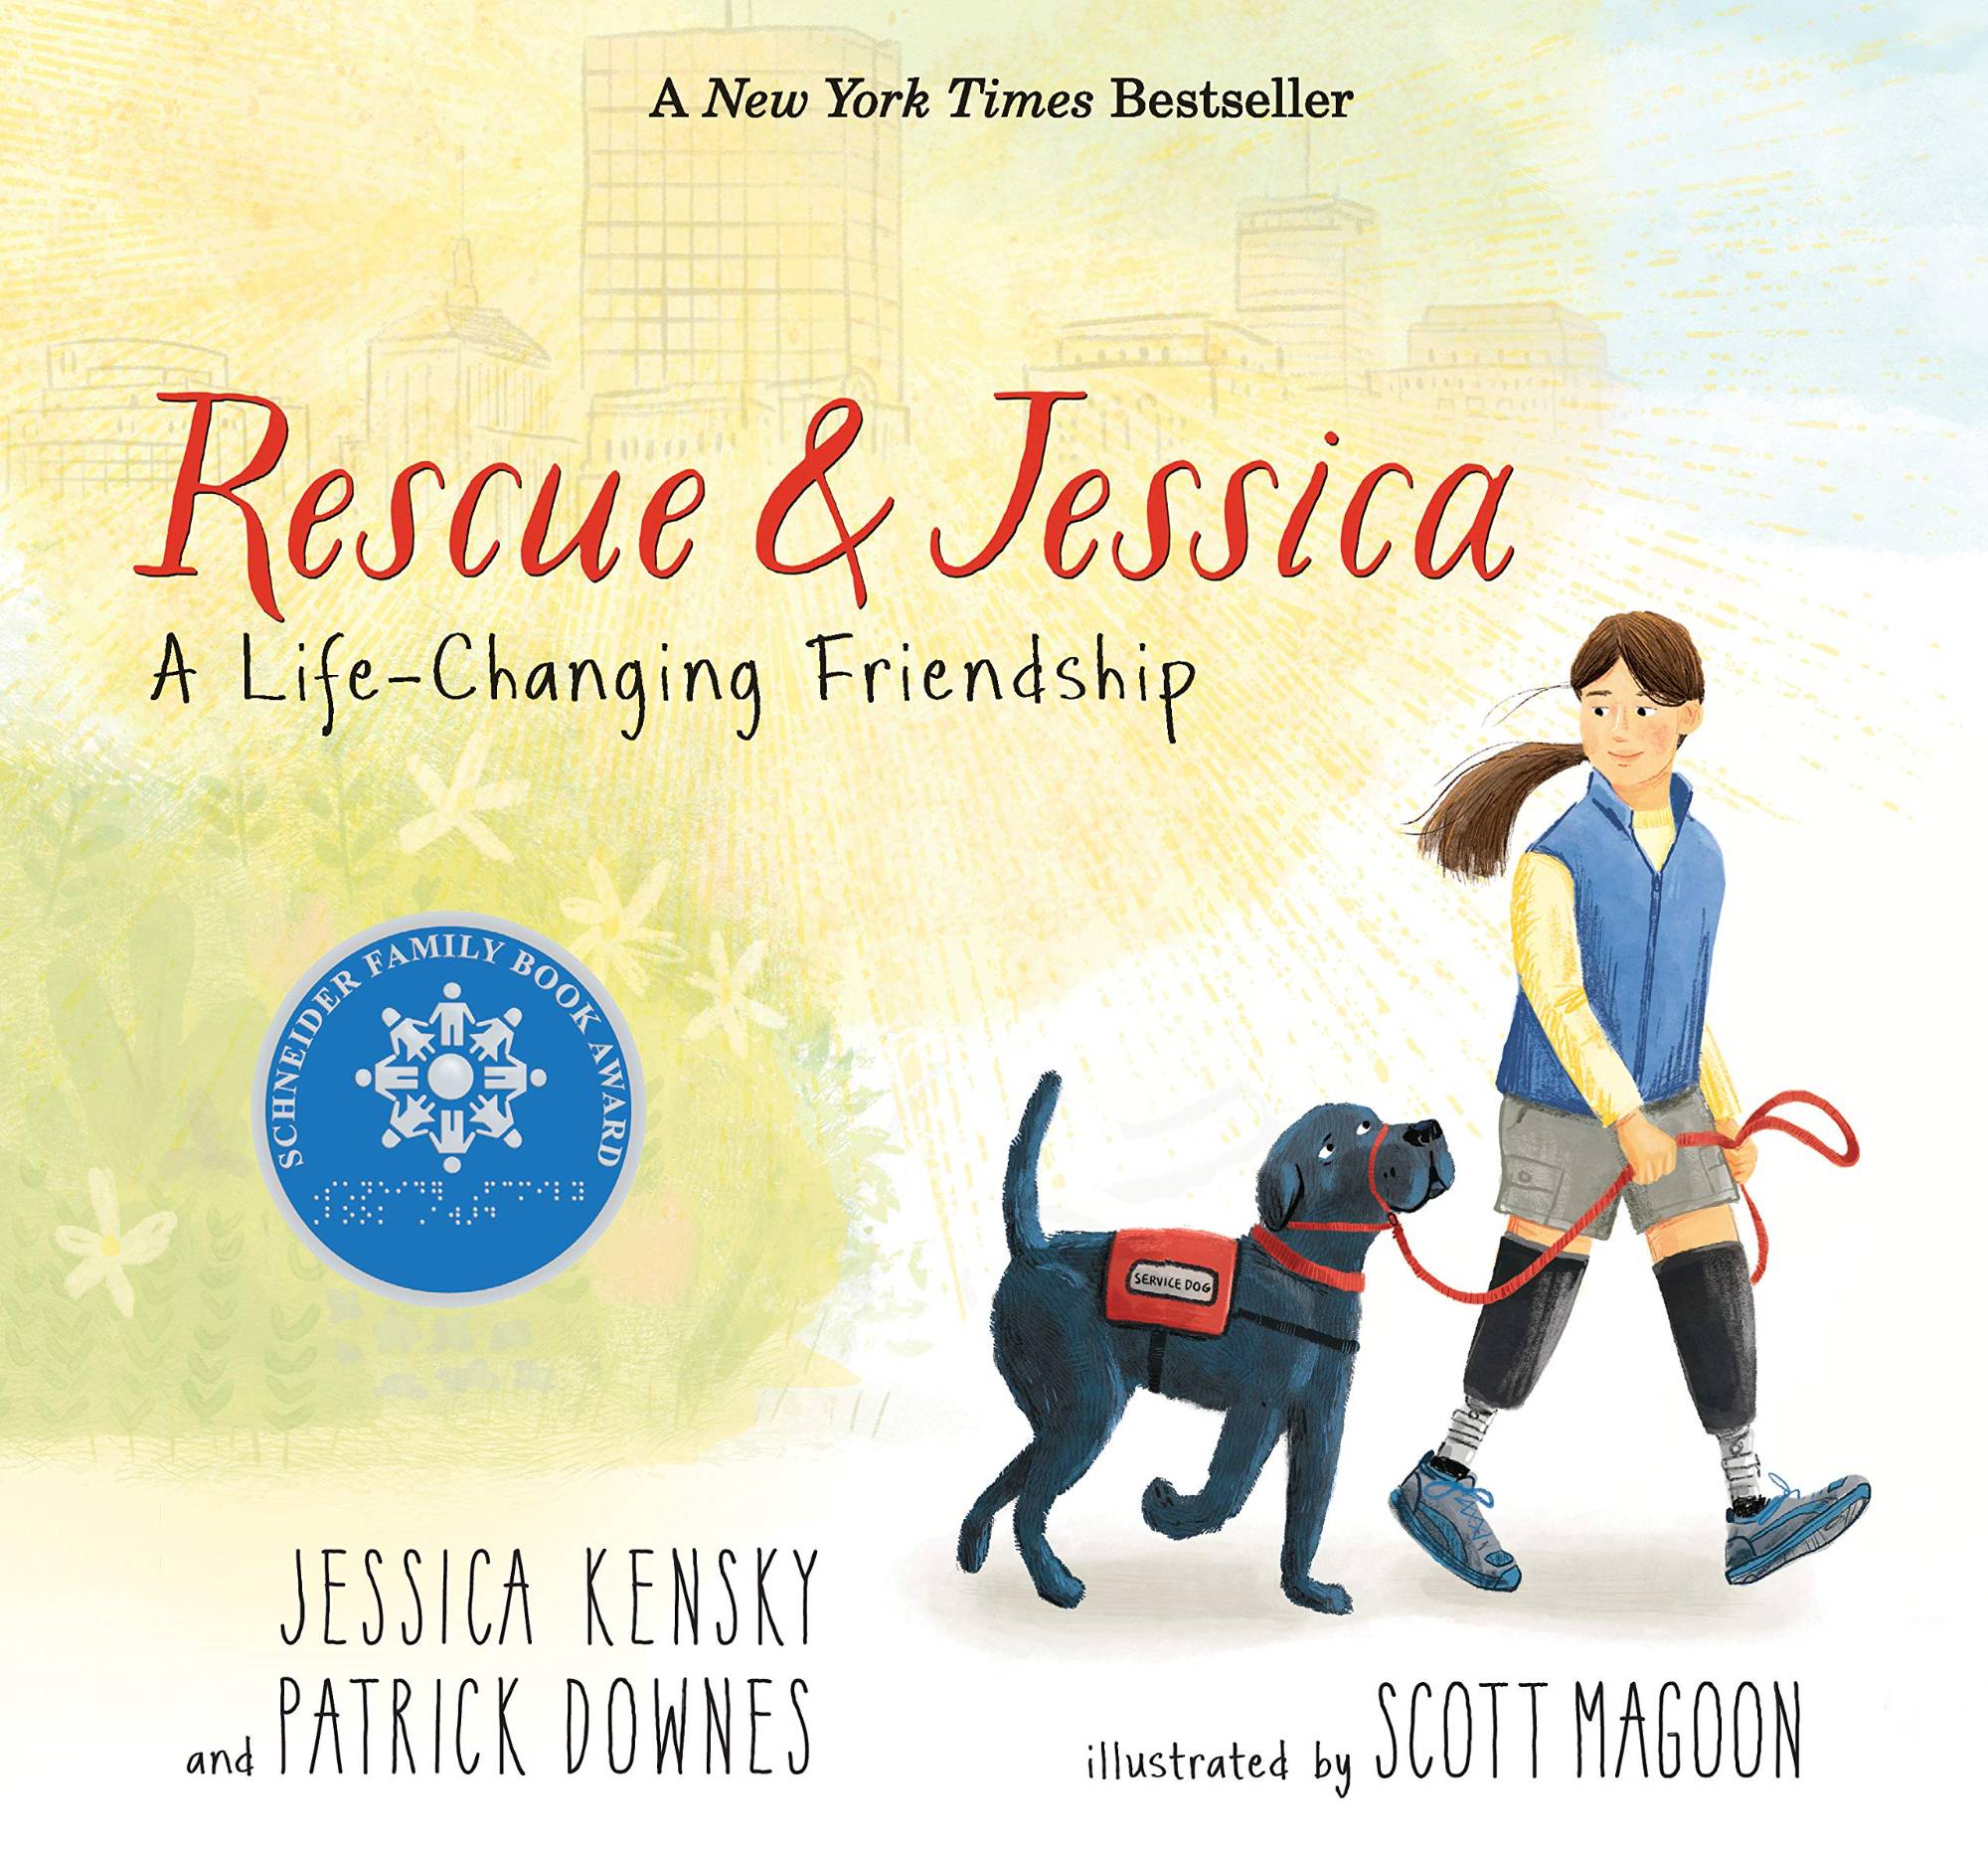 Illustrated "Rescue & Jessica" book cover featuring a woman and a service dog.